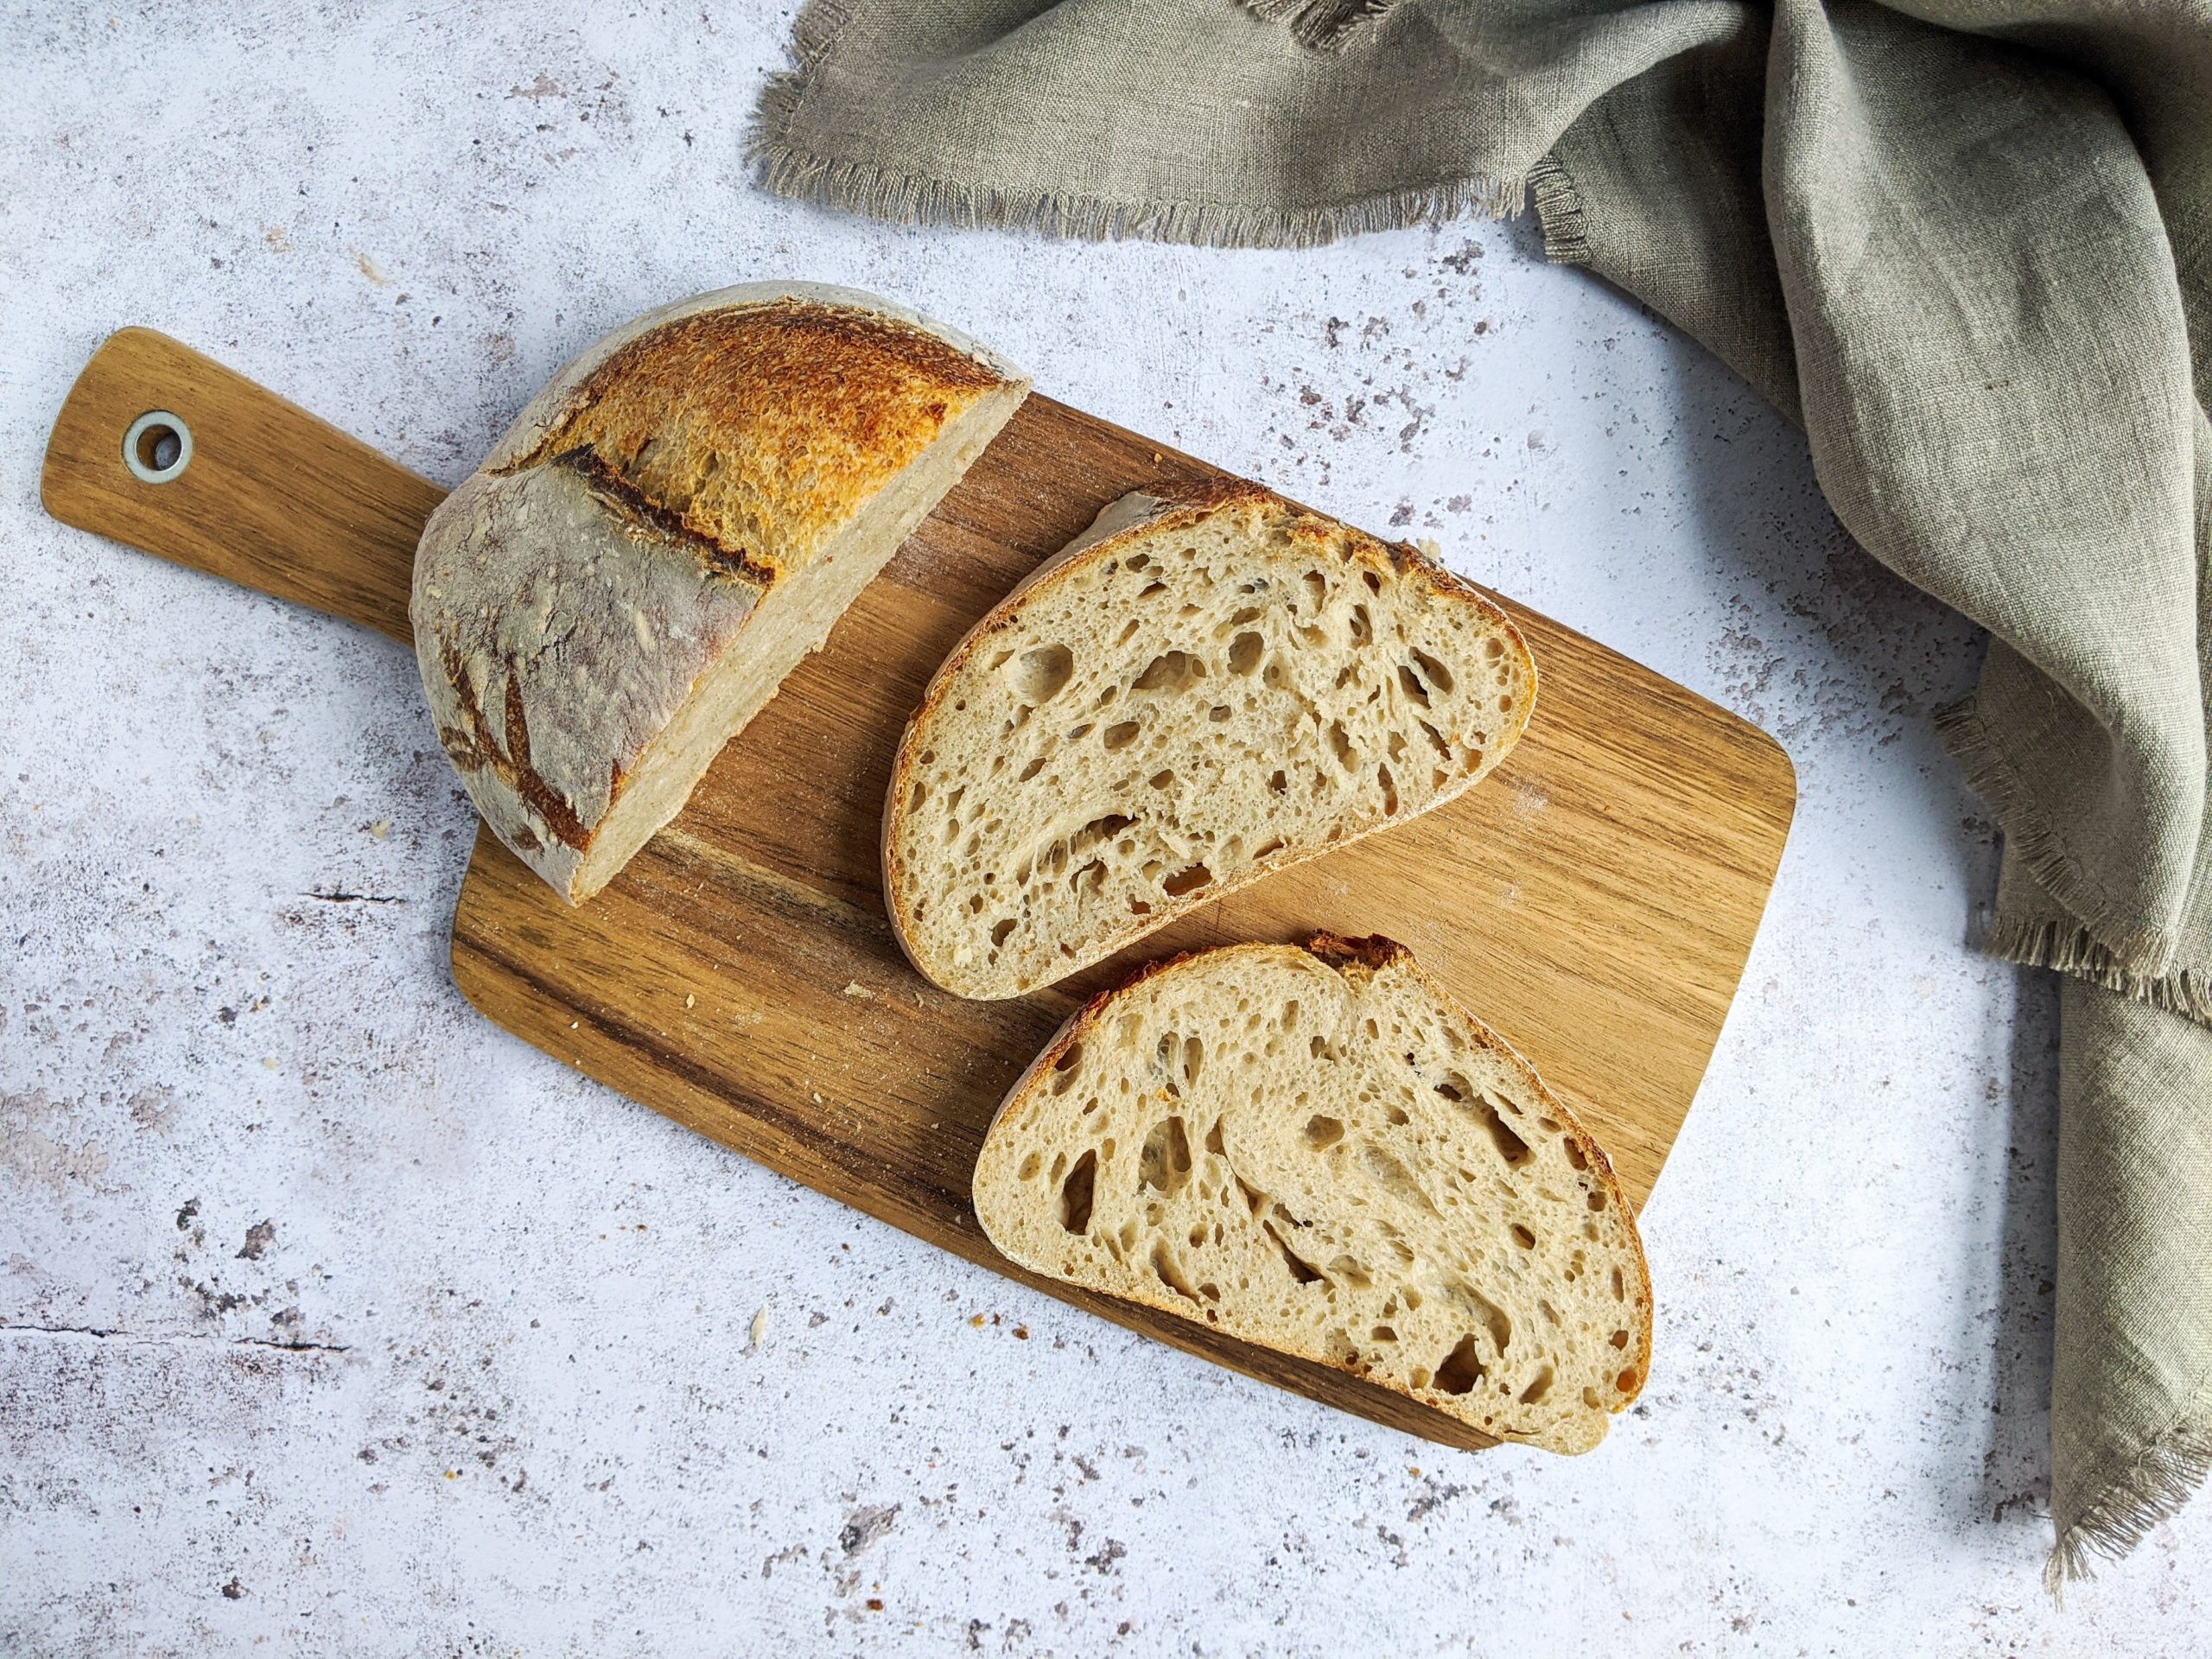 What is Bromate: The Carcinogen that Could Be in Your Bread